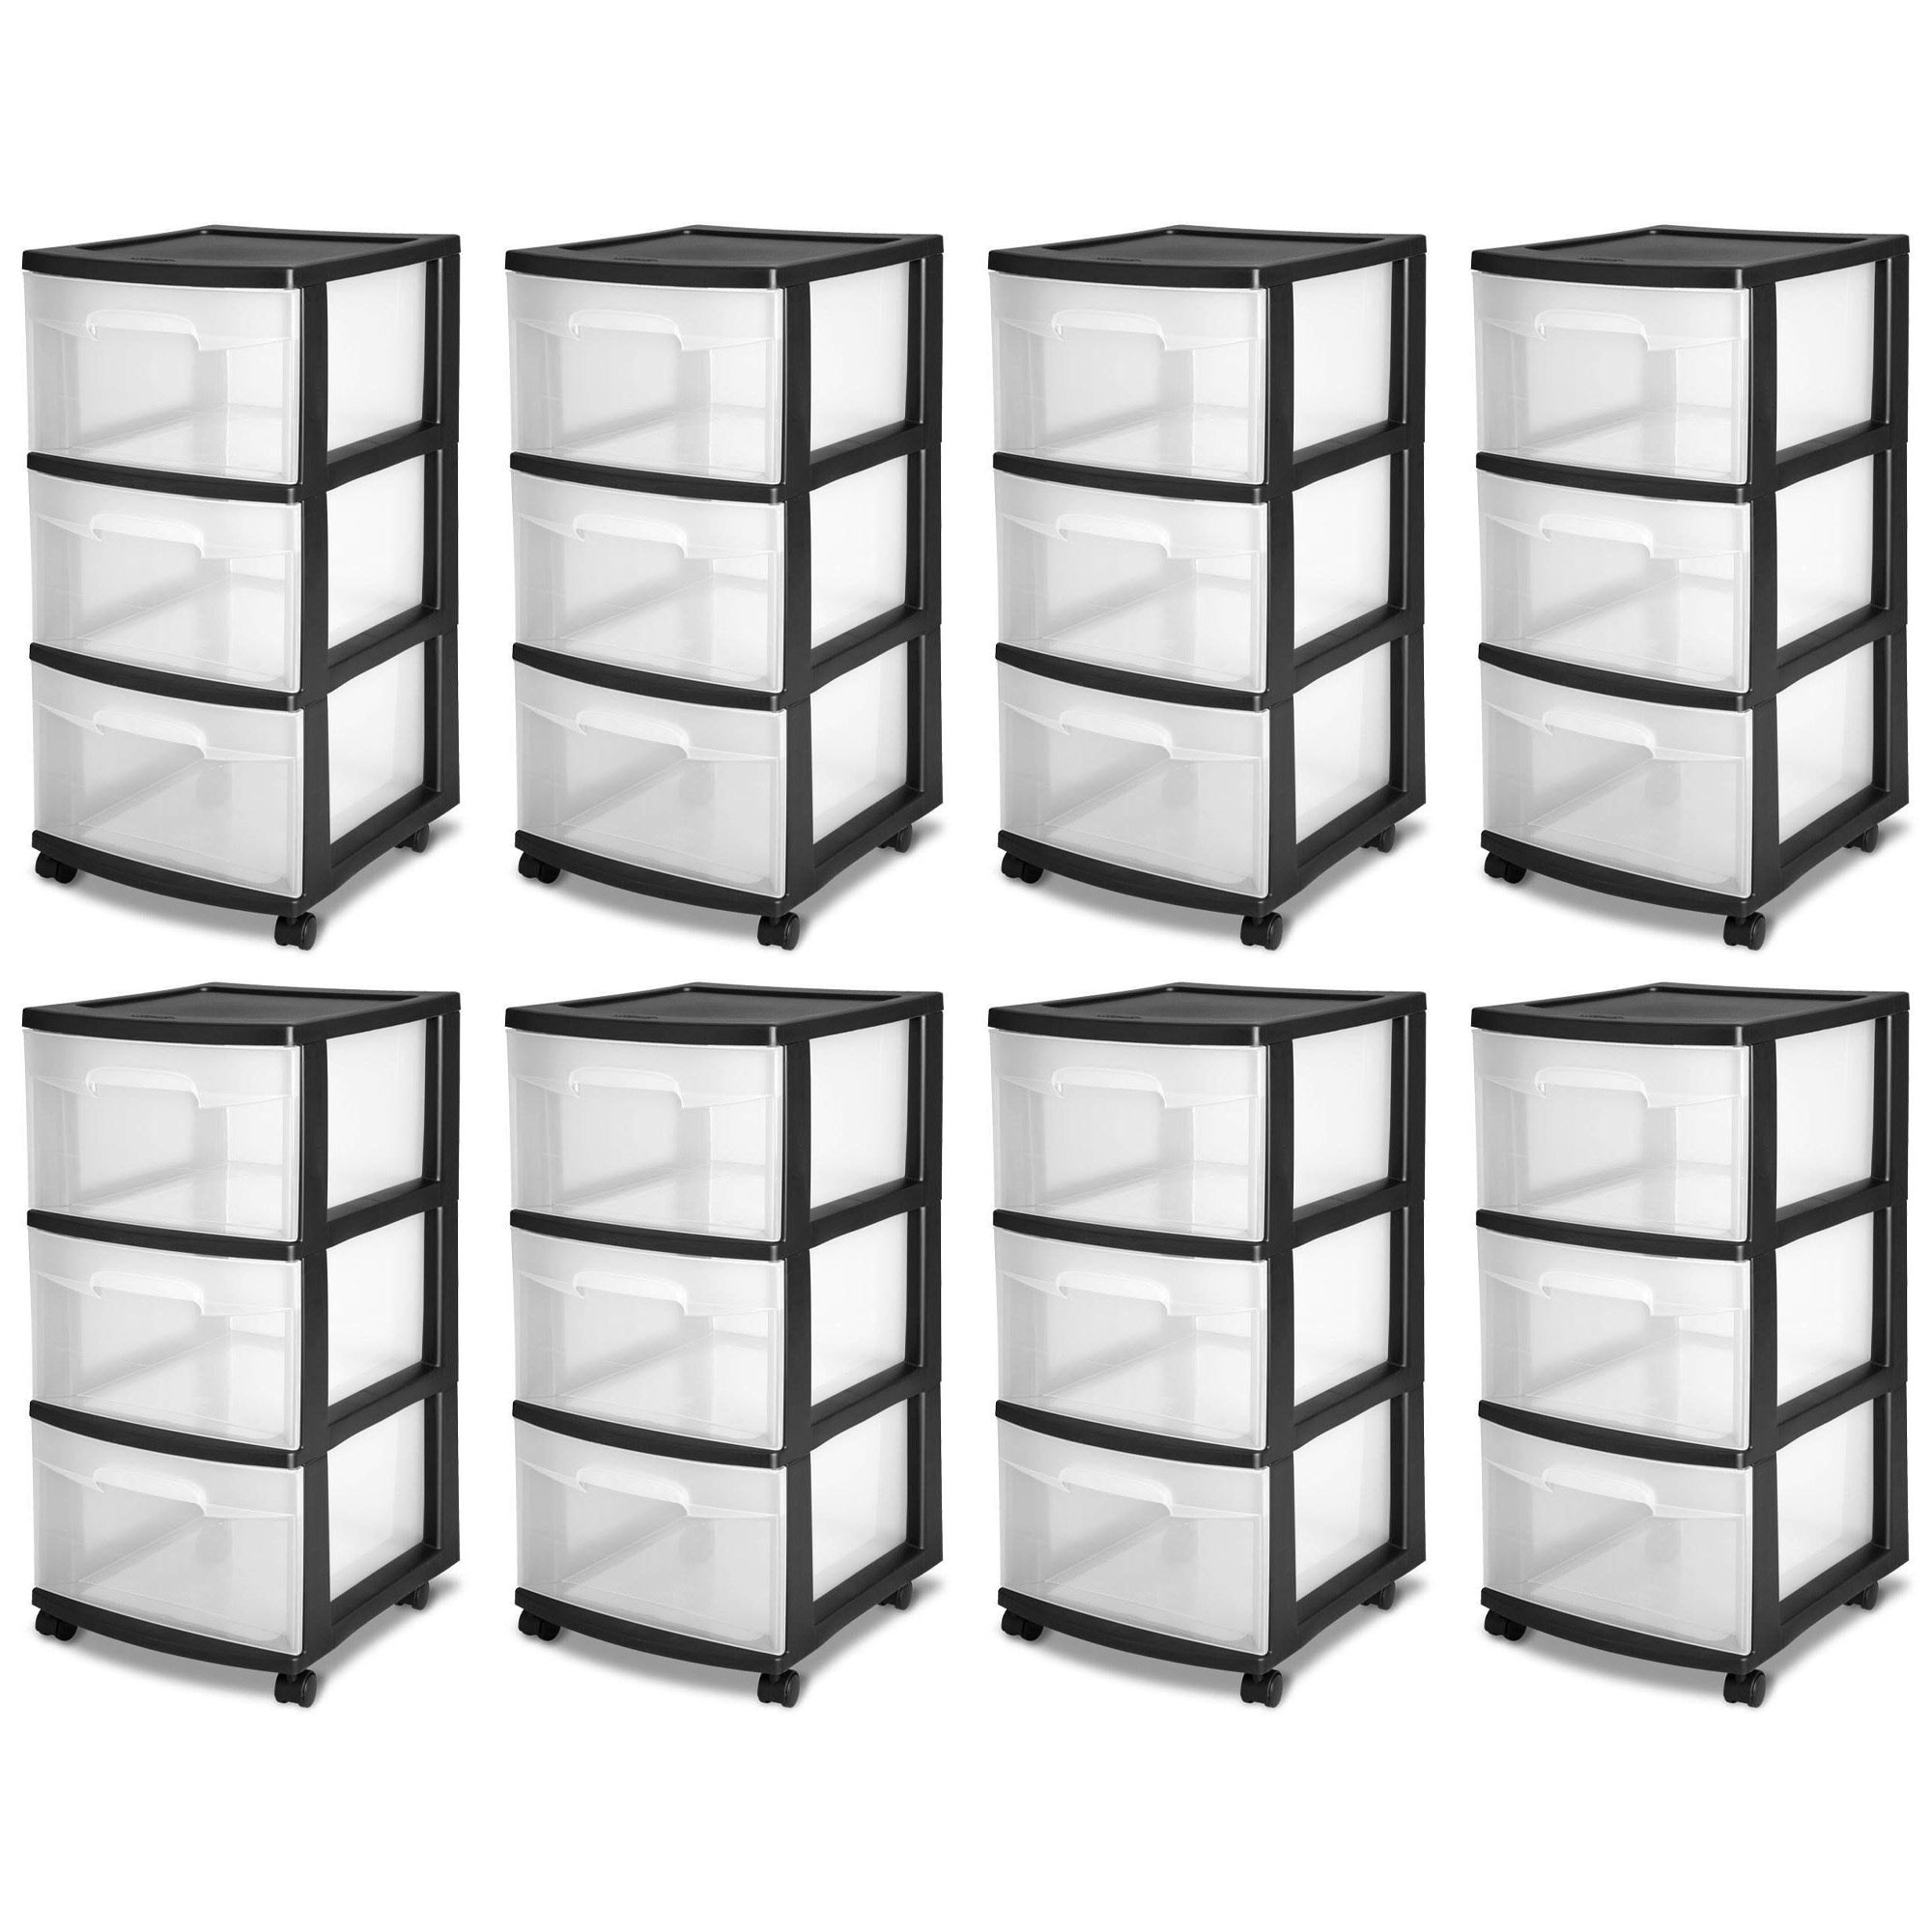 Sterilite 3 Drawer Storage Cart with Clear Drawers and Black Frame (8 Pack)  - 6 - Bed Bath & Beyond - 36022099